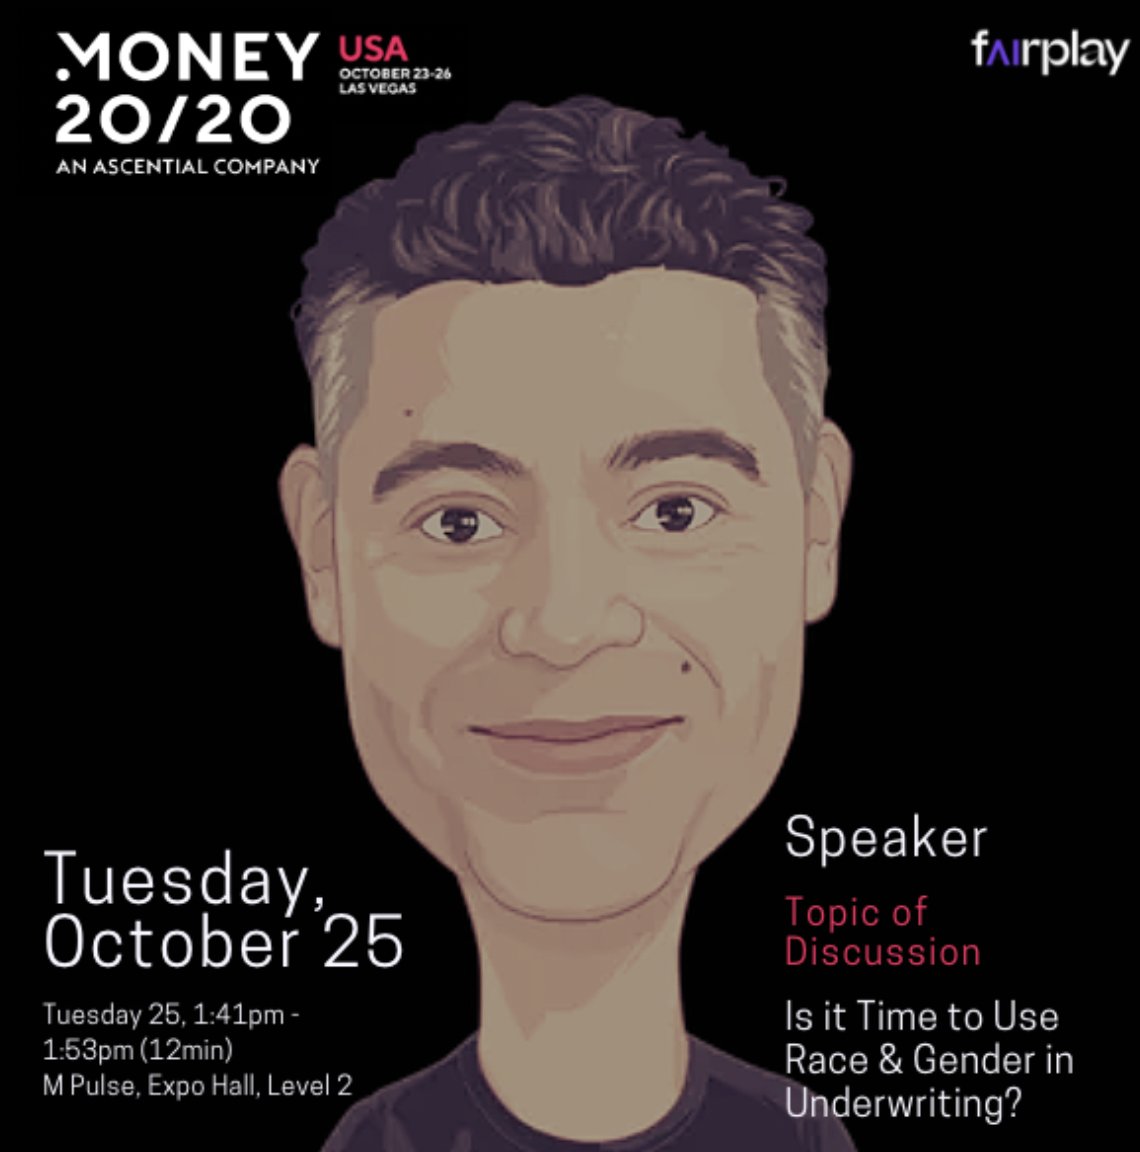 Are you headed to @money2020 this year? Our founder @kareemsaleh will be speaking about new #AIFairness techniques and how using race & gender data can make lending decisions fairer. Check out his talk on Tues, Oct 25: